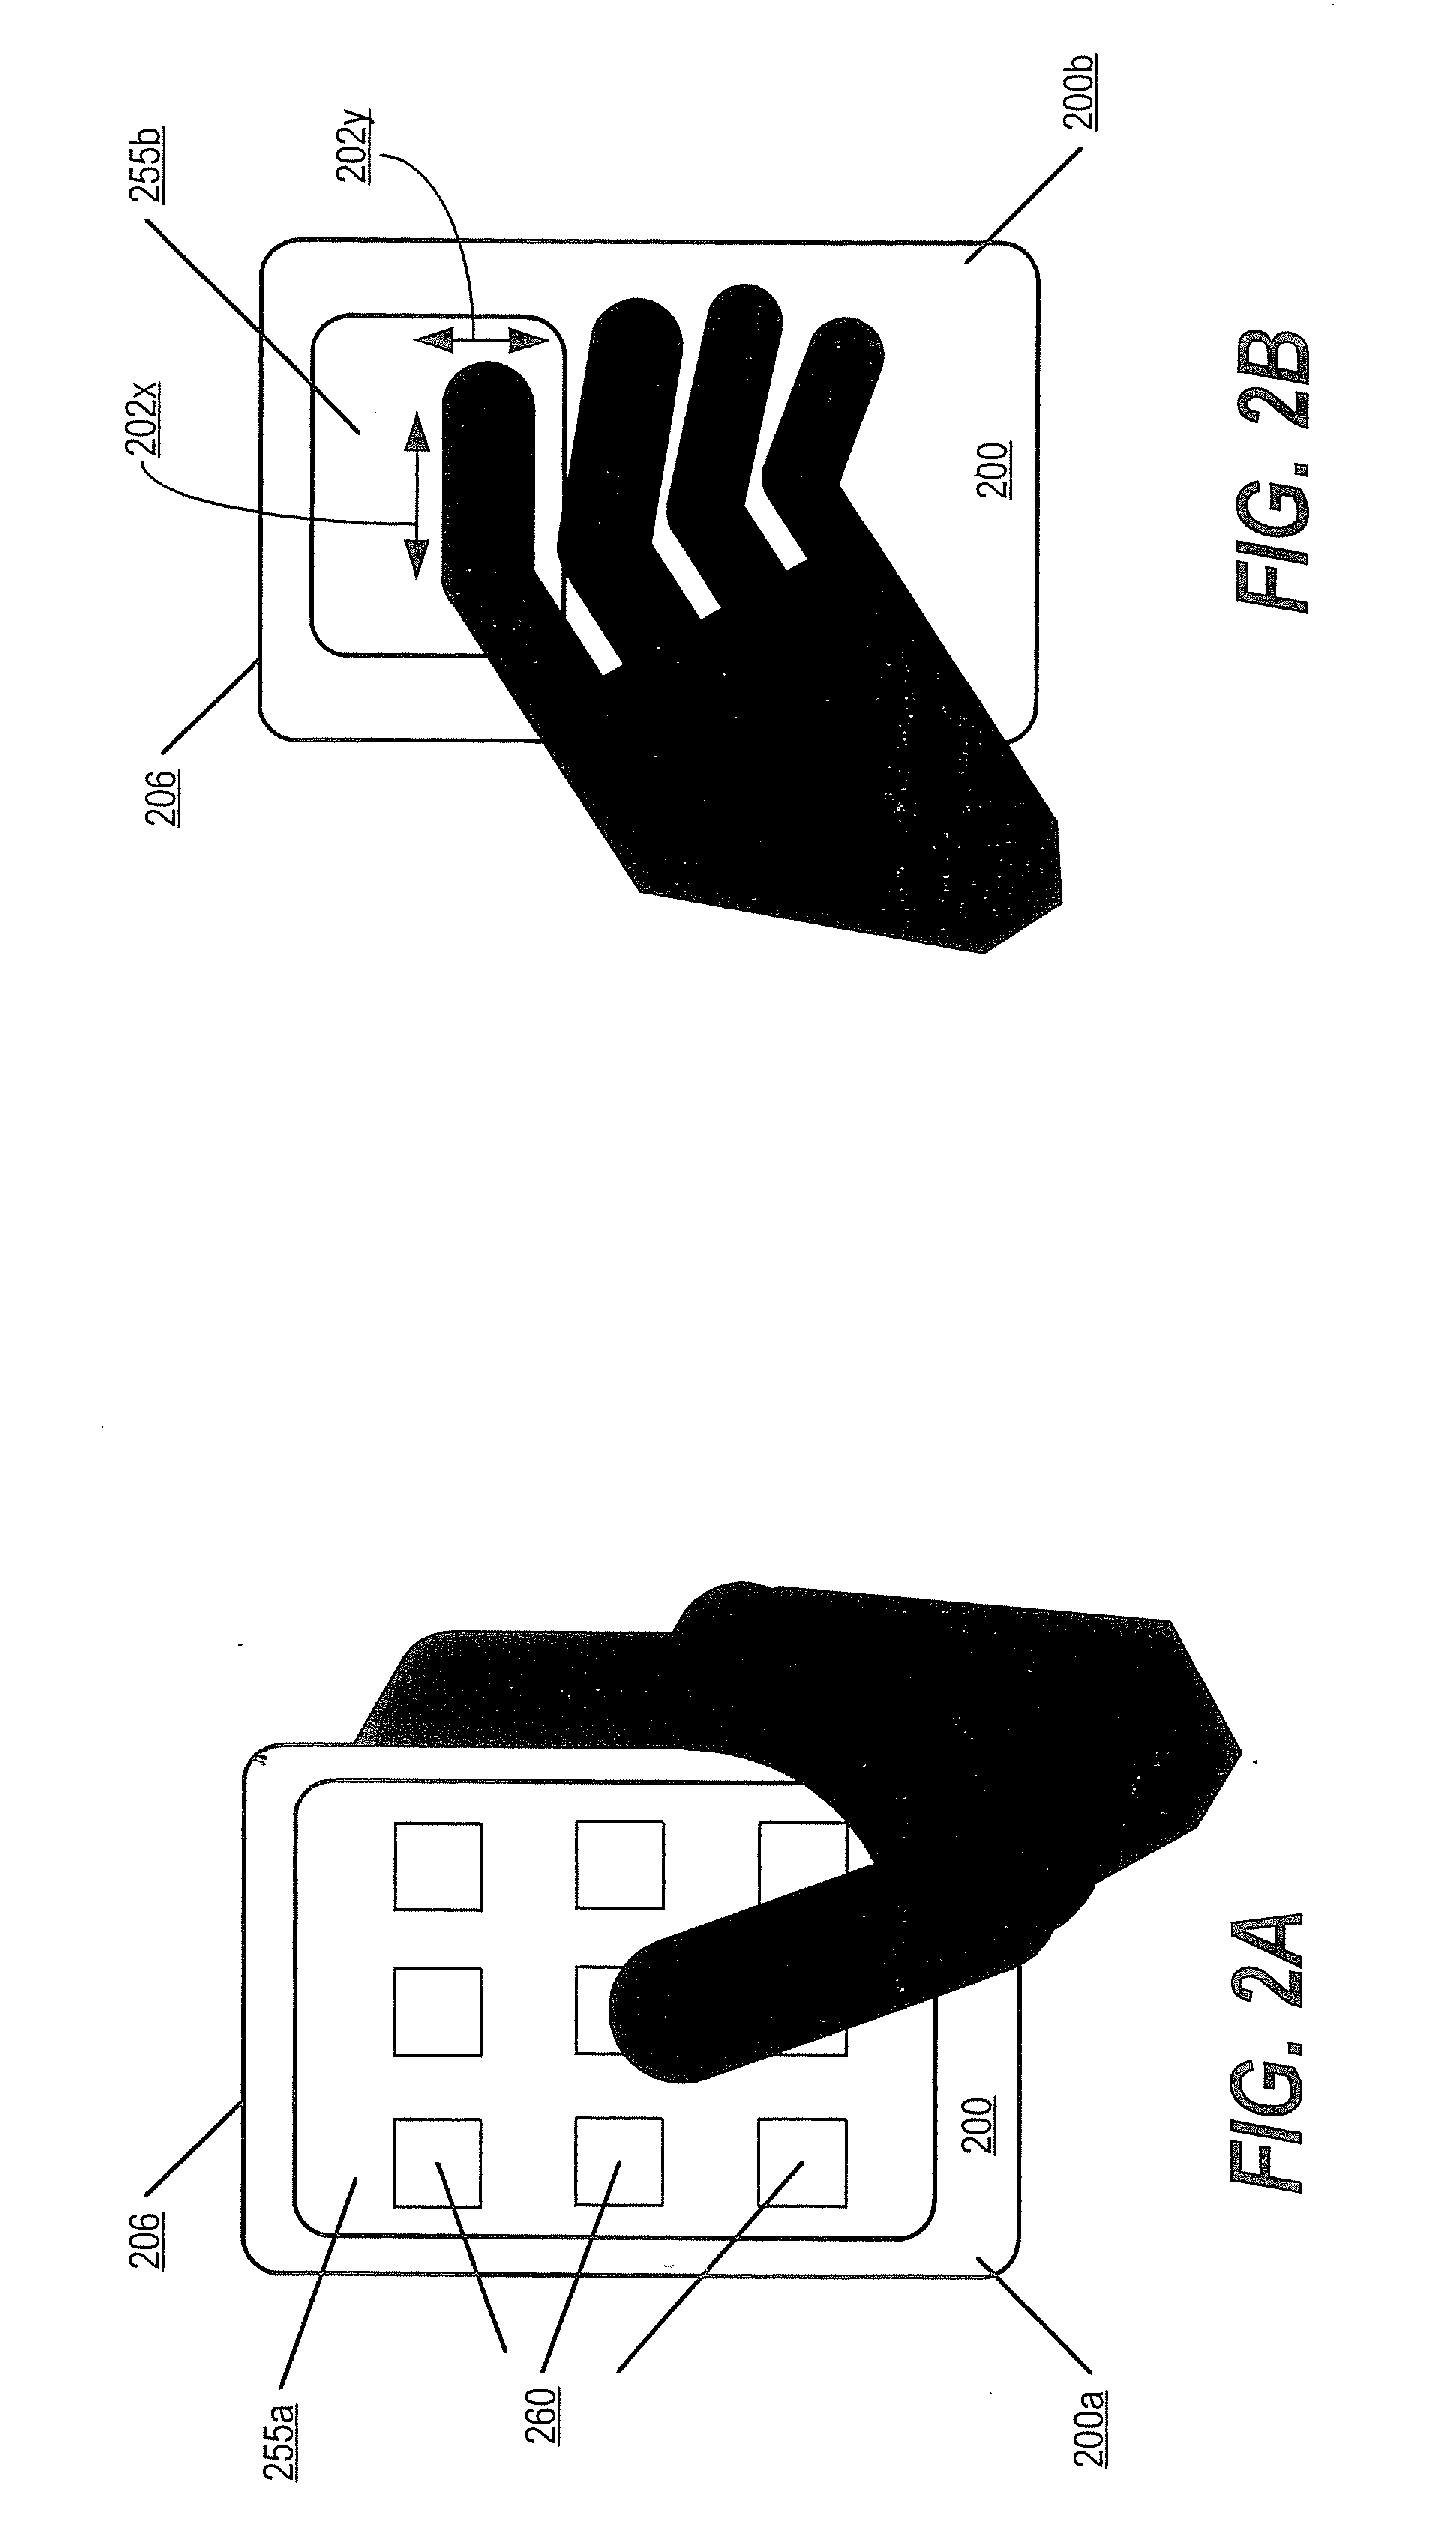 Mobile terminals including multiple user interfaces on different faces thereof configured to be used in tandem and related methods of operation